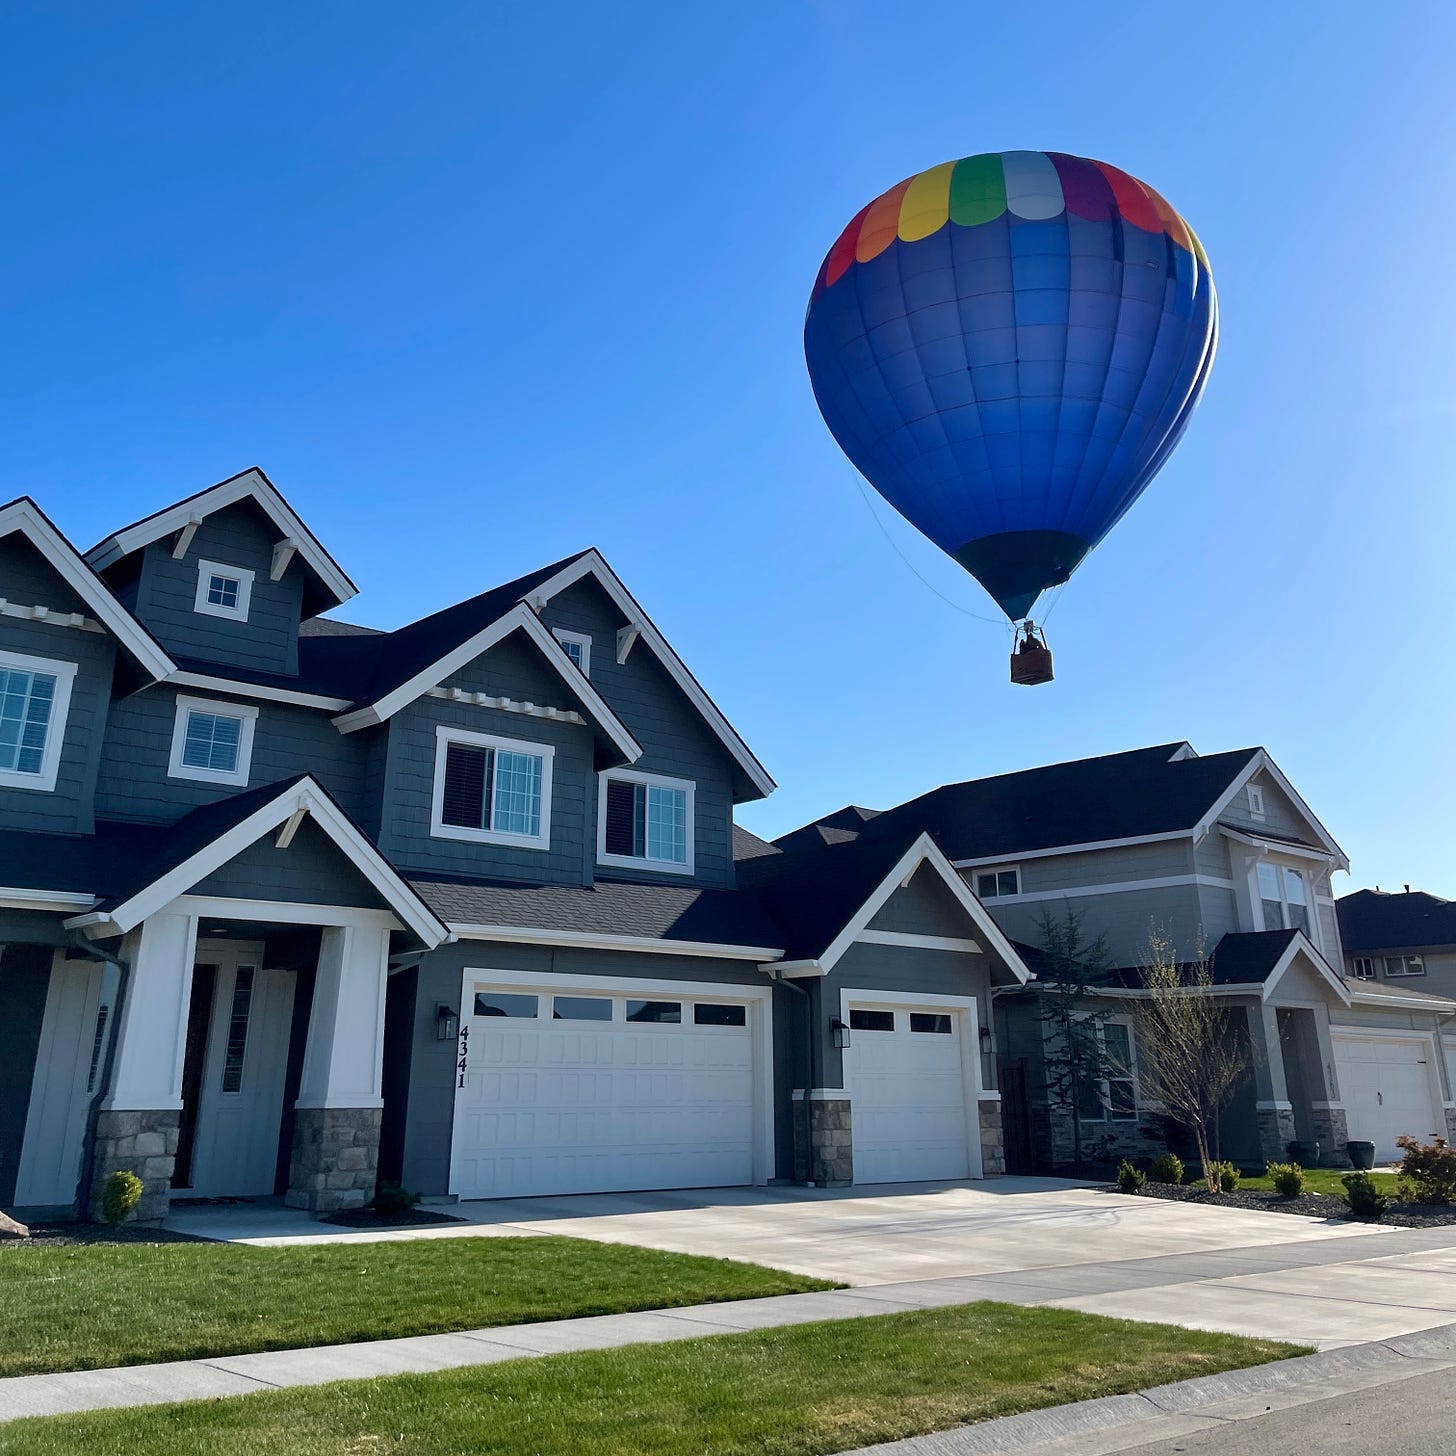 Balloon floating over home